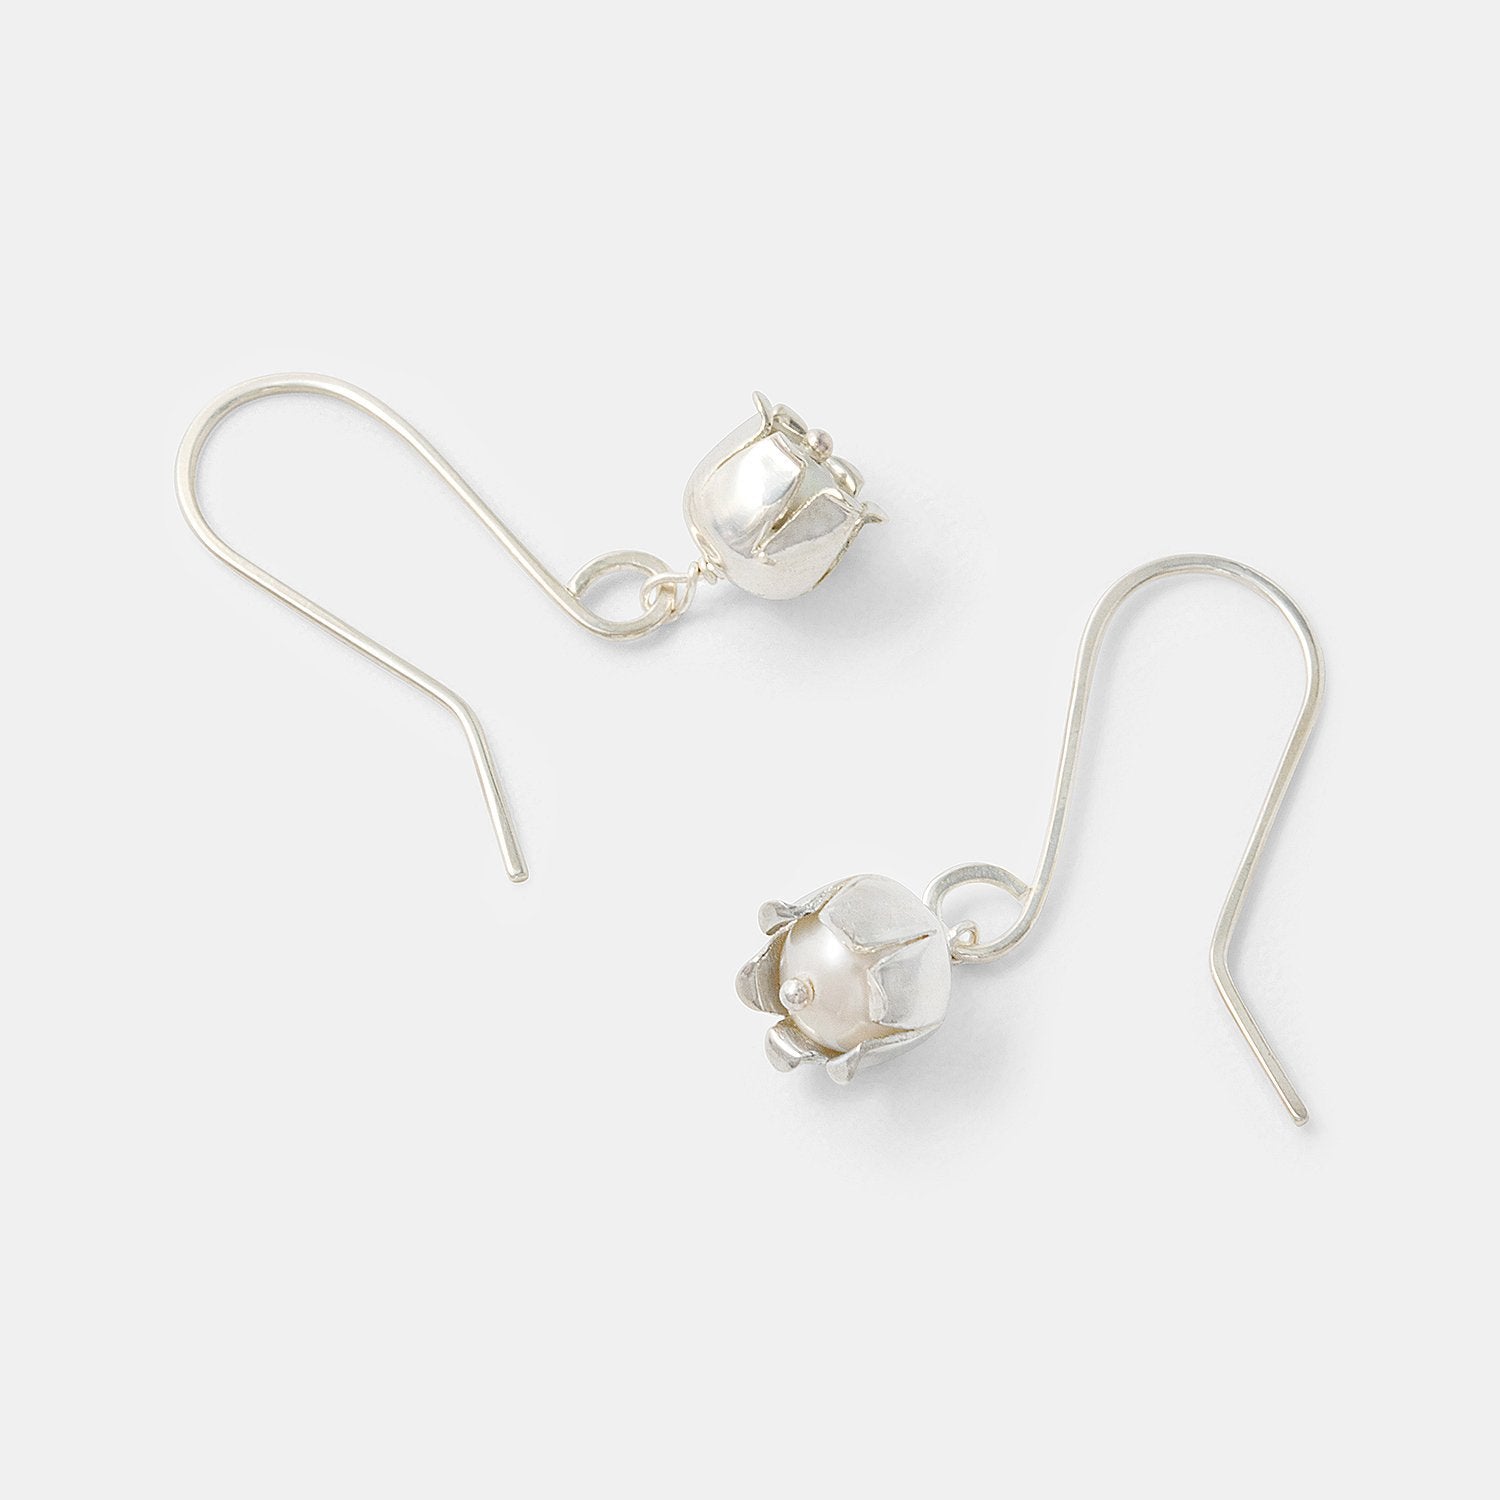 Lily of the valley earrings - Simone Walsh Jewellery Australia